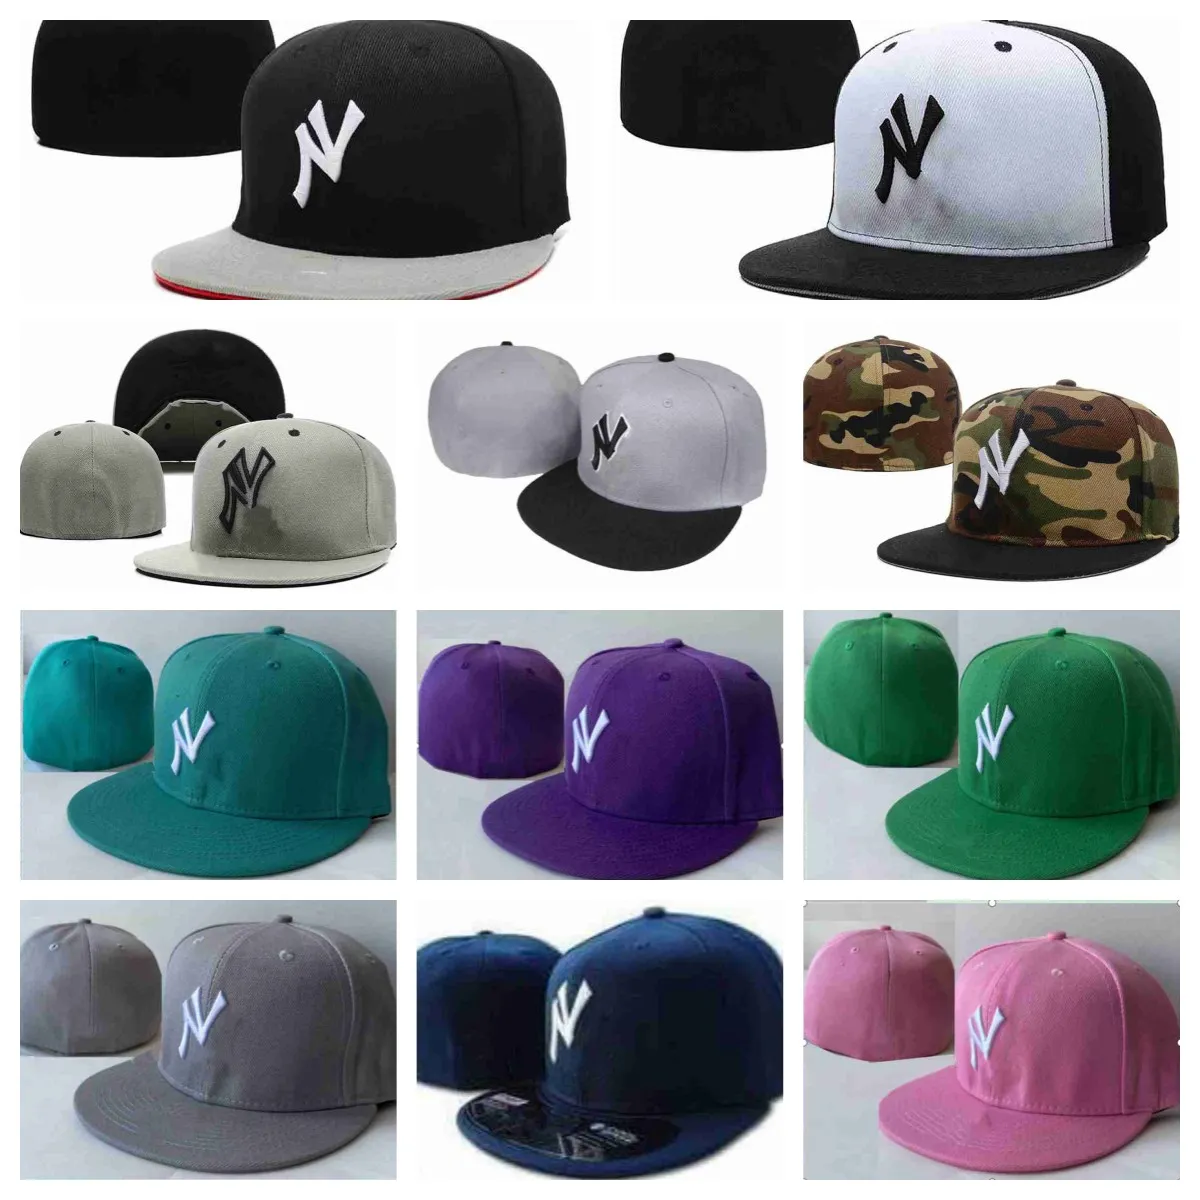 2023 Newest Designer Fitted hats size Flat hat Baseball Fit Flat hat Embroidery era cap Adjustable basketball Caps Outdoor Sports Hip Hop Beanies Mesh cap size 7-8